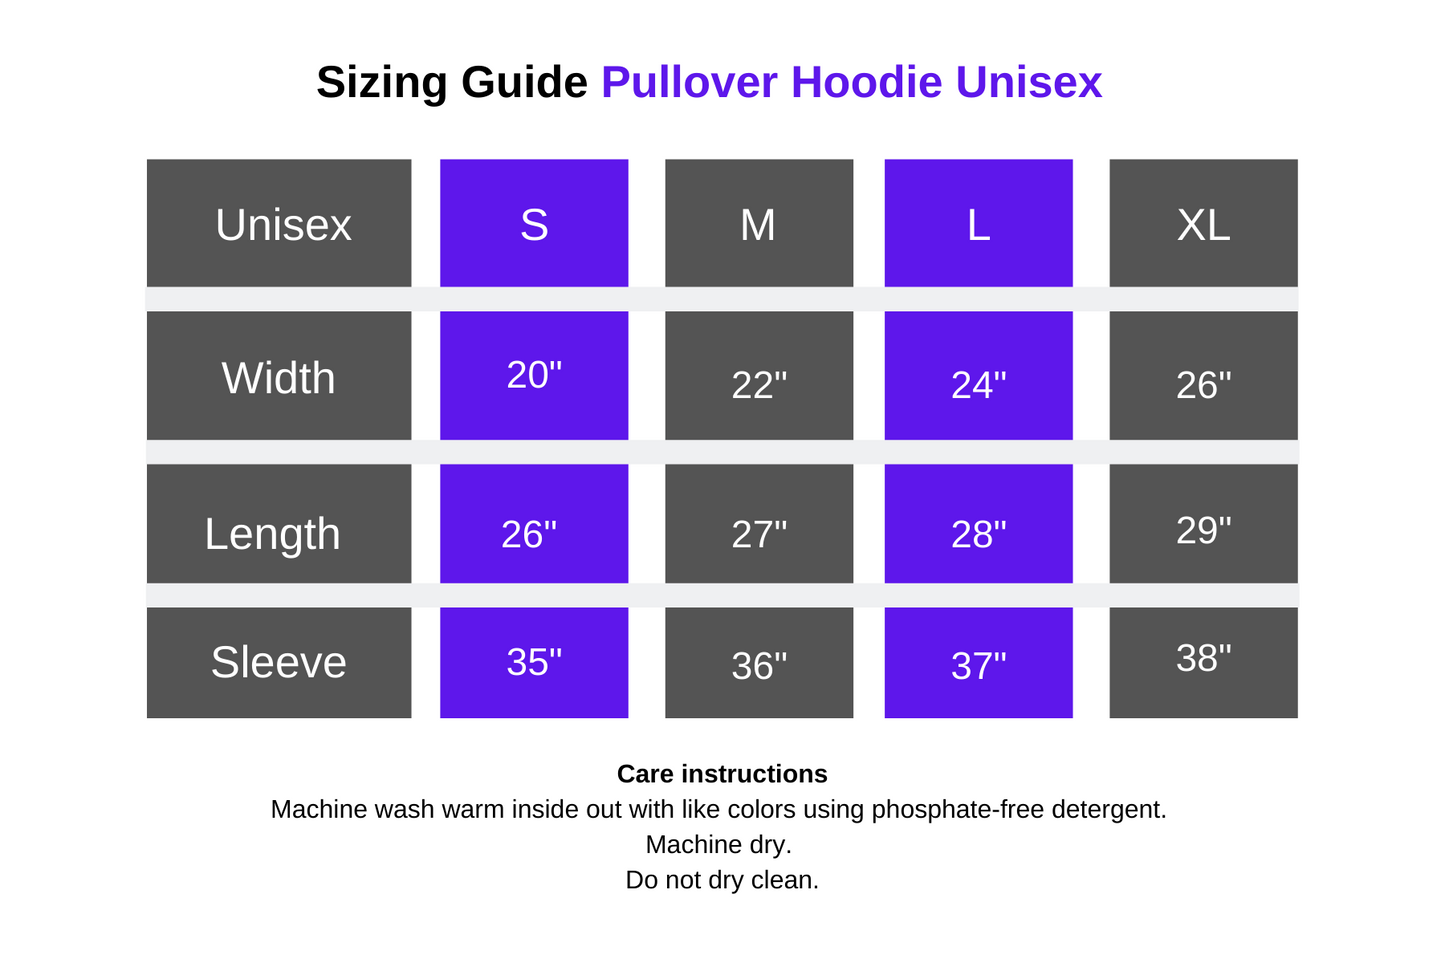 Size Guide for Unisex Pullover Hoodie